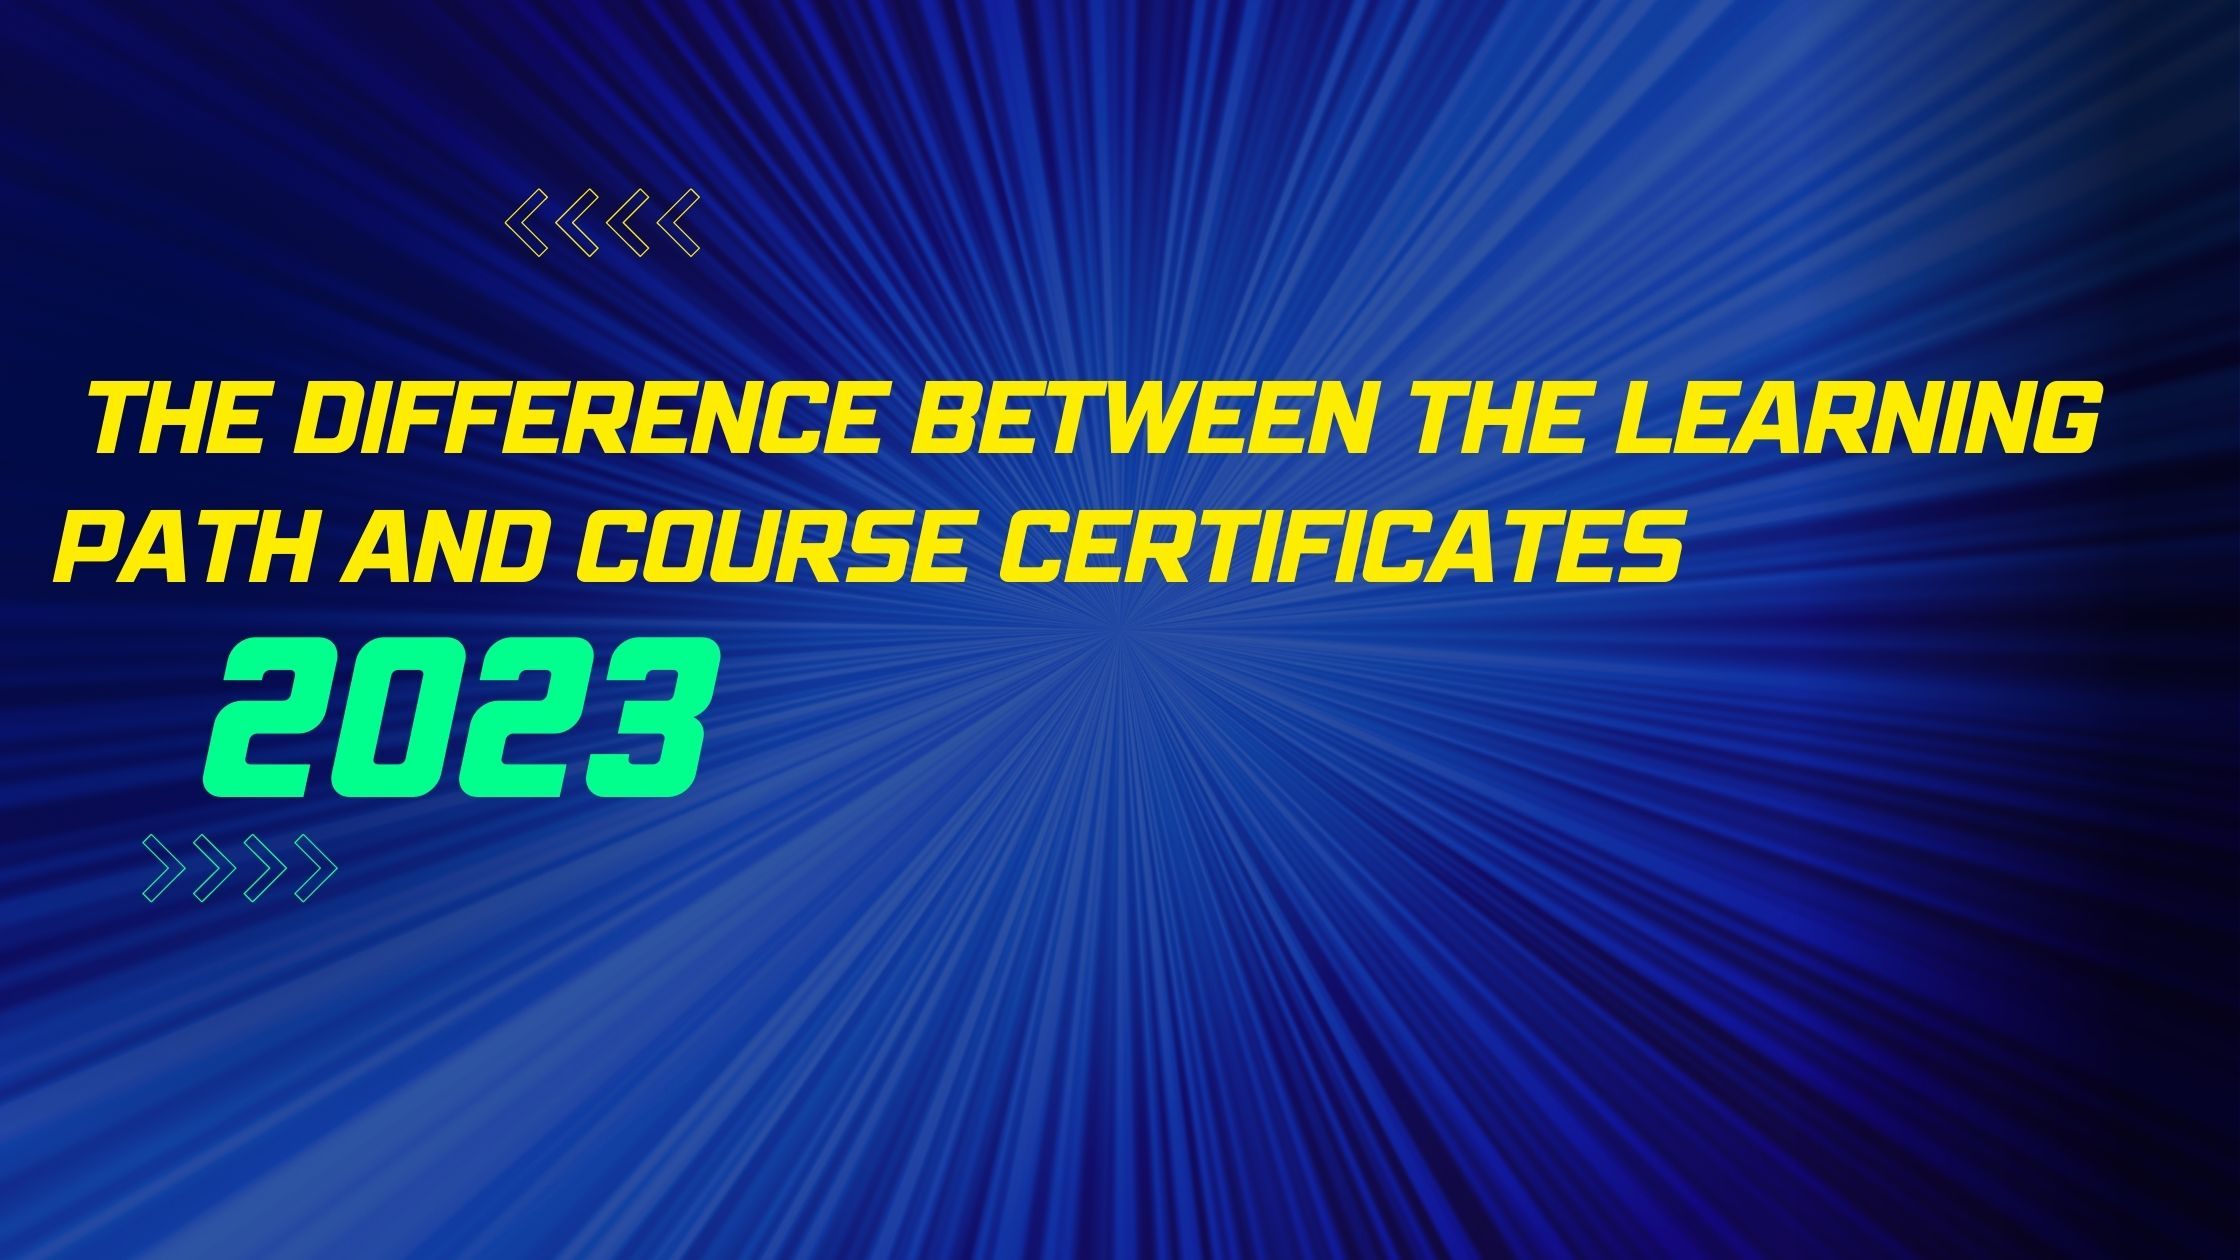 The difference between the learning path and course certificates in 2023